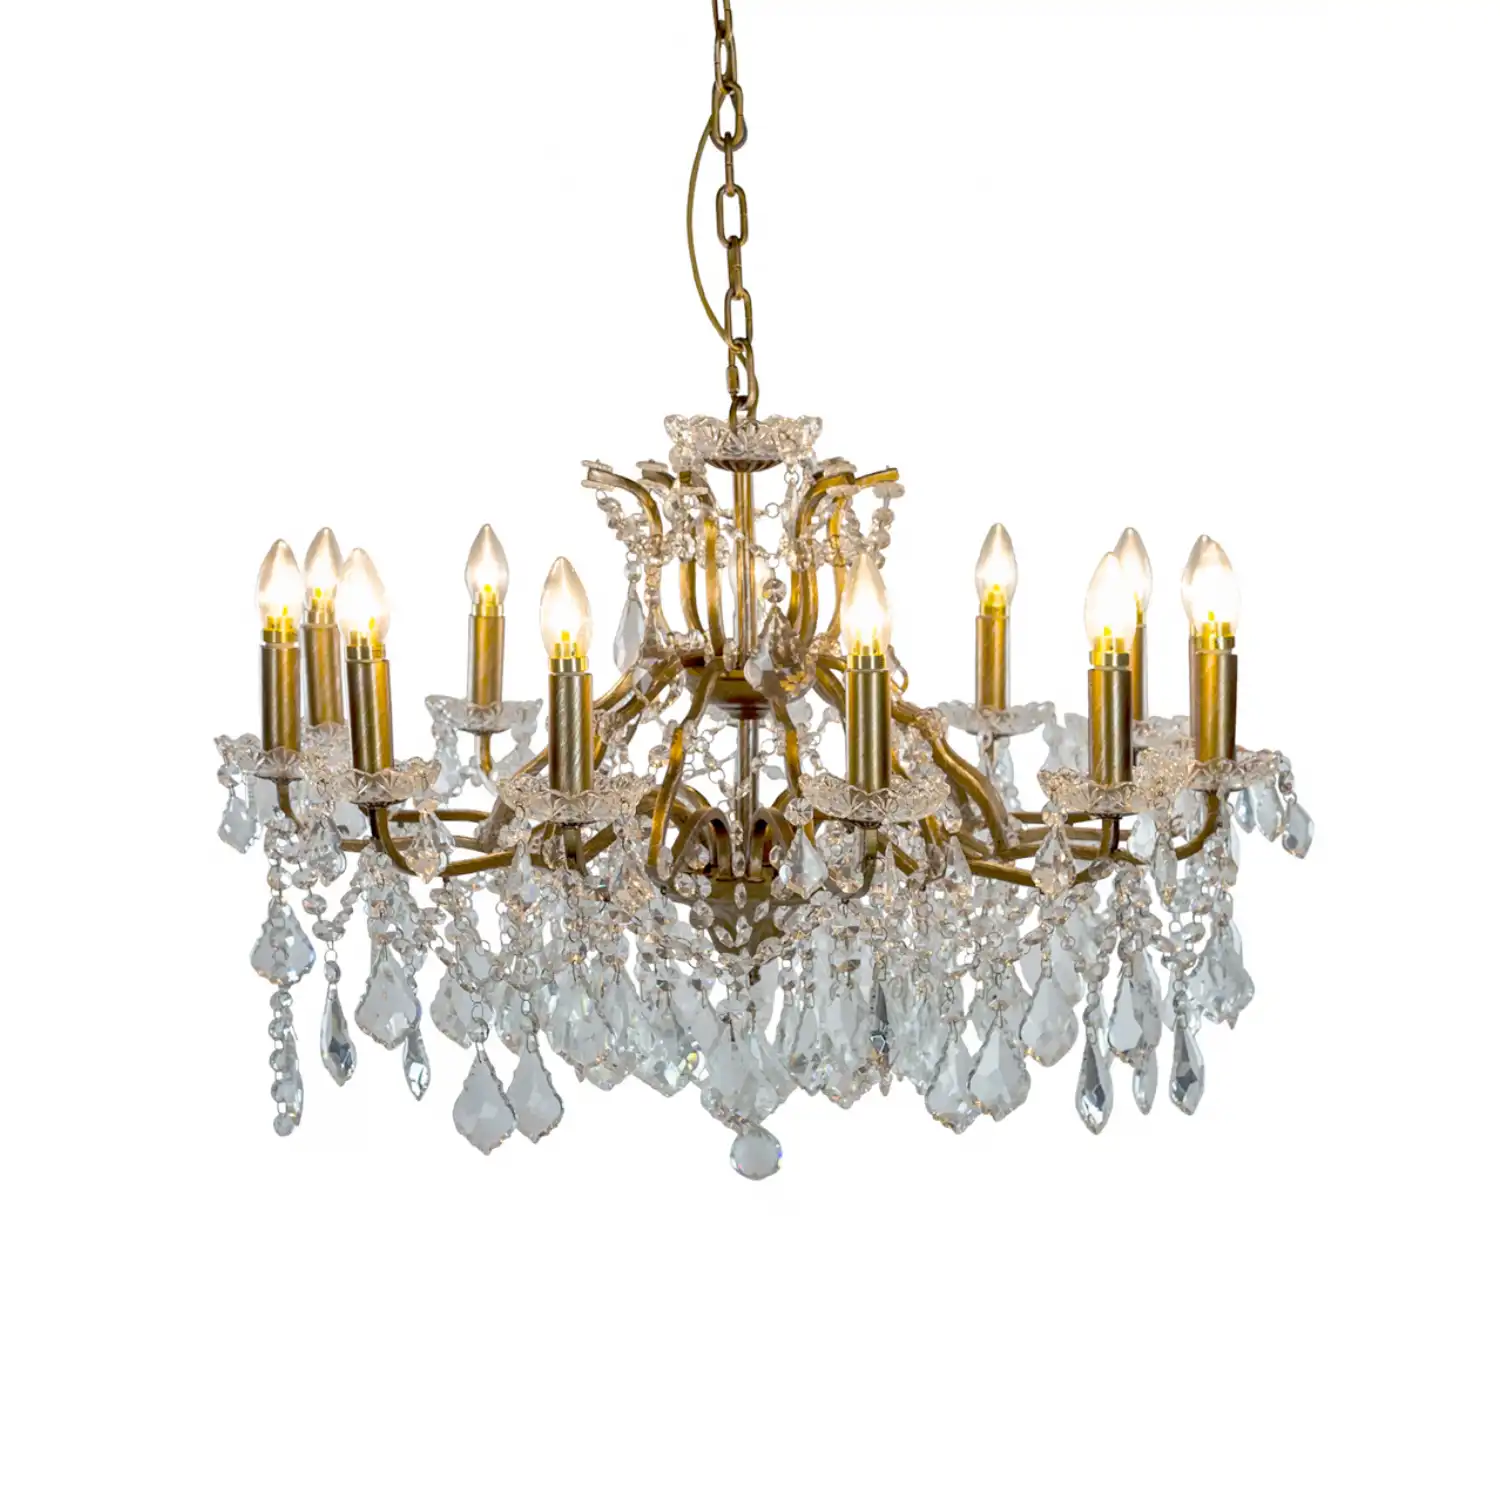 Large 12 Branch Gold Cut Glass Shallow Chandelier